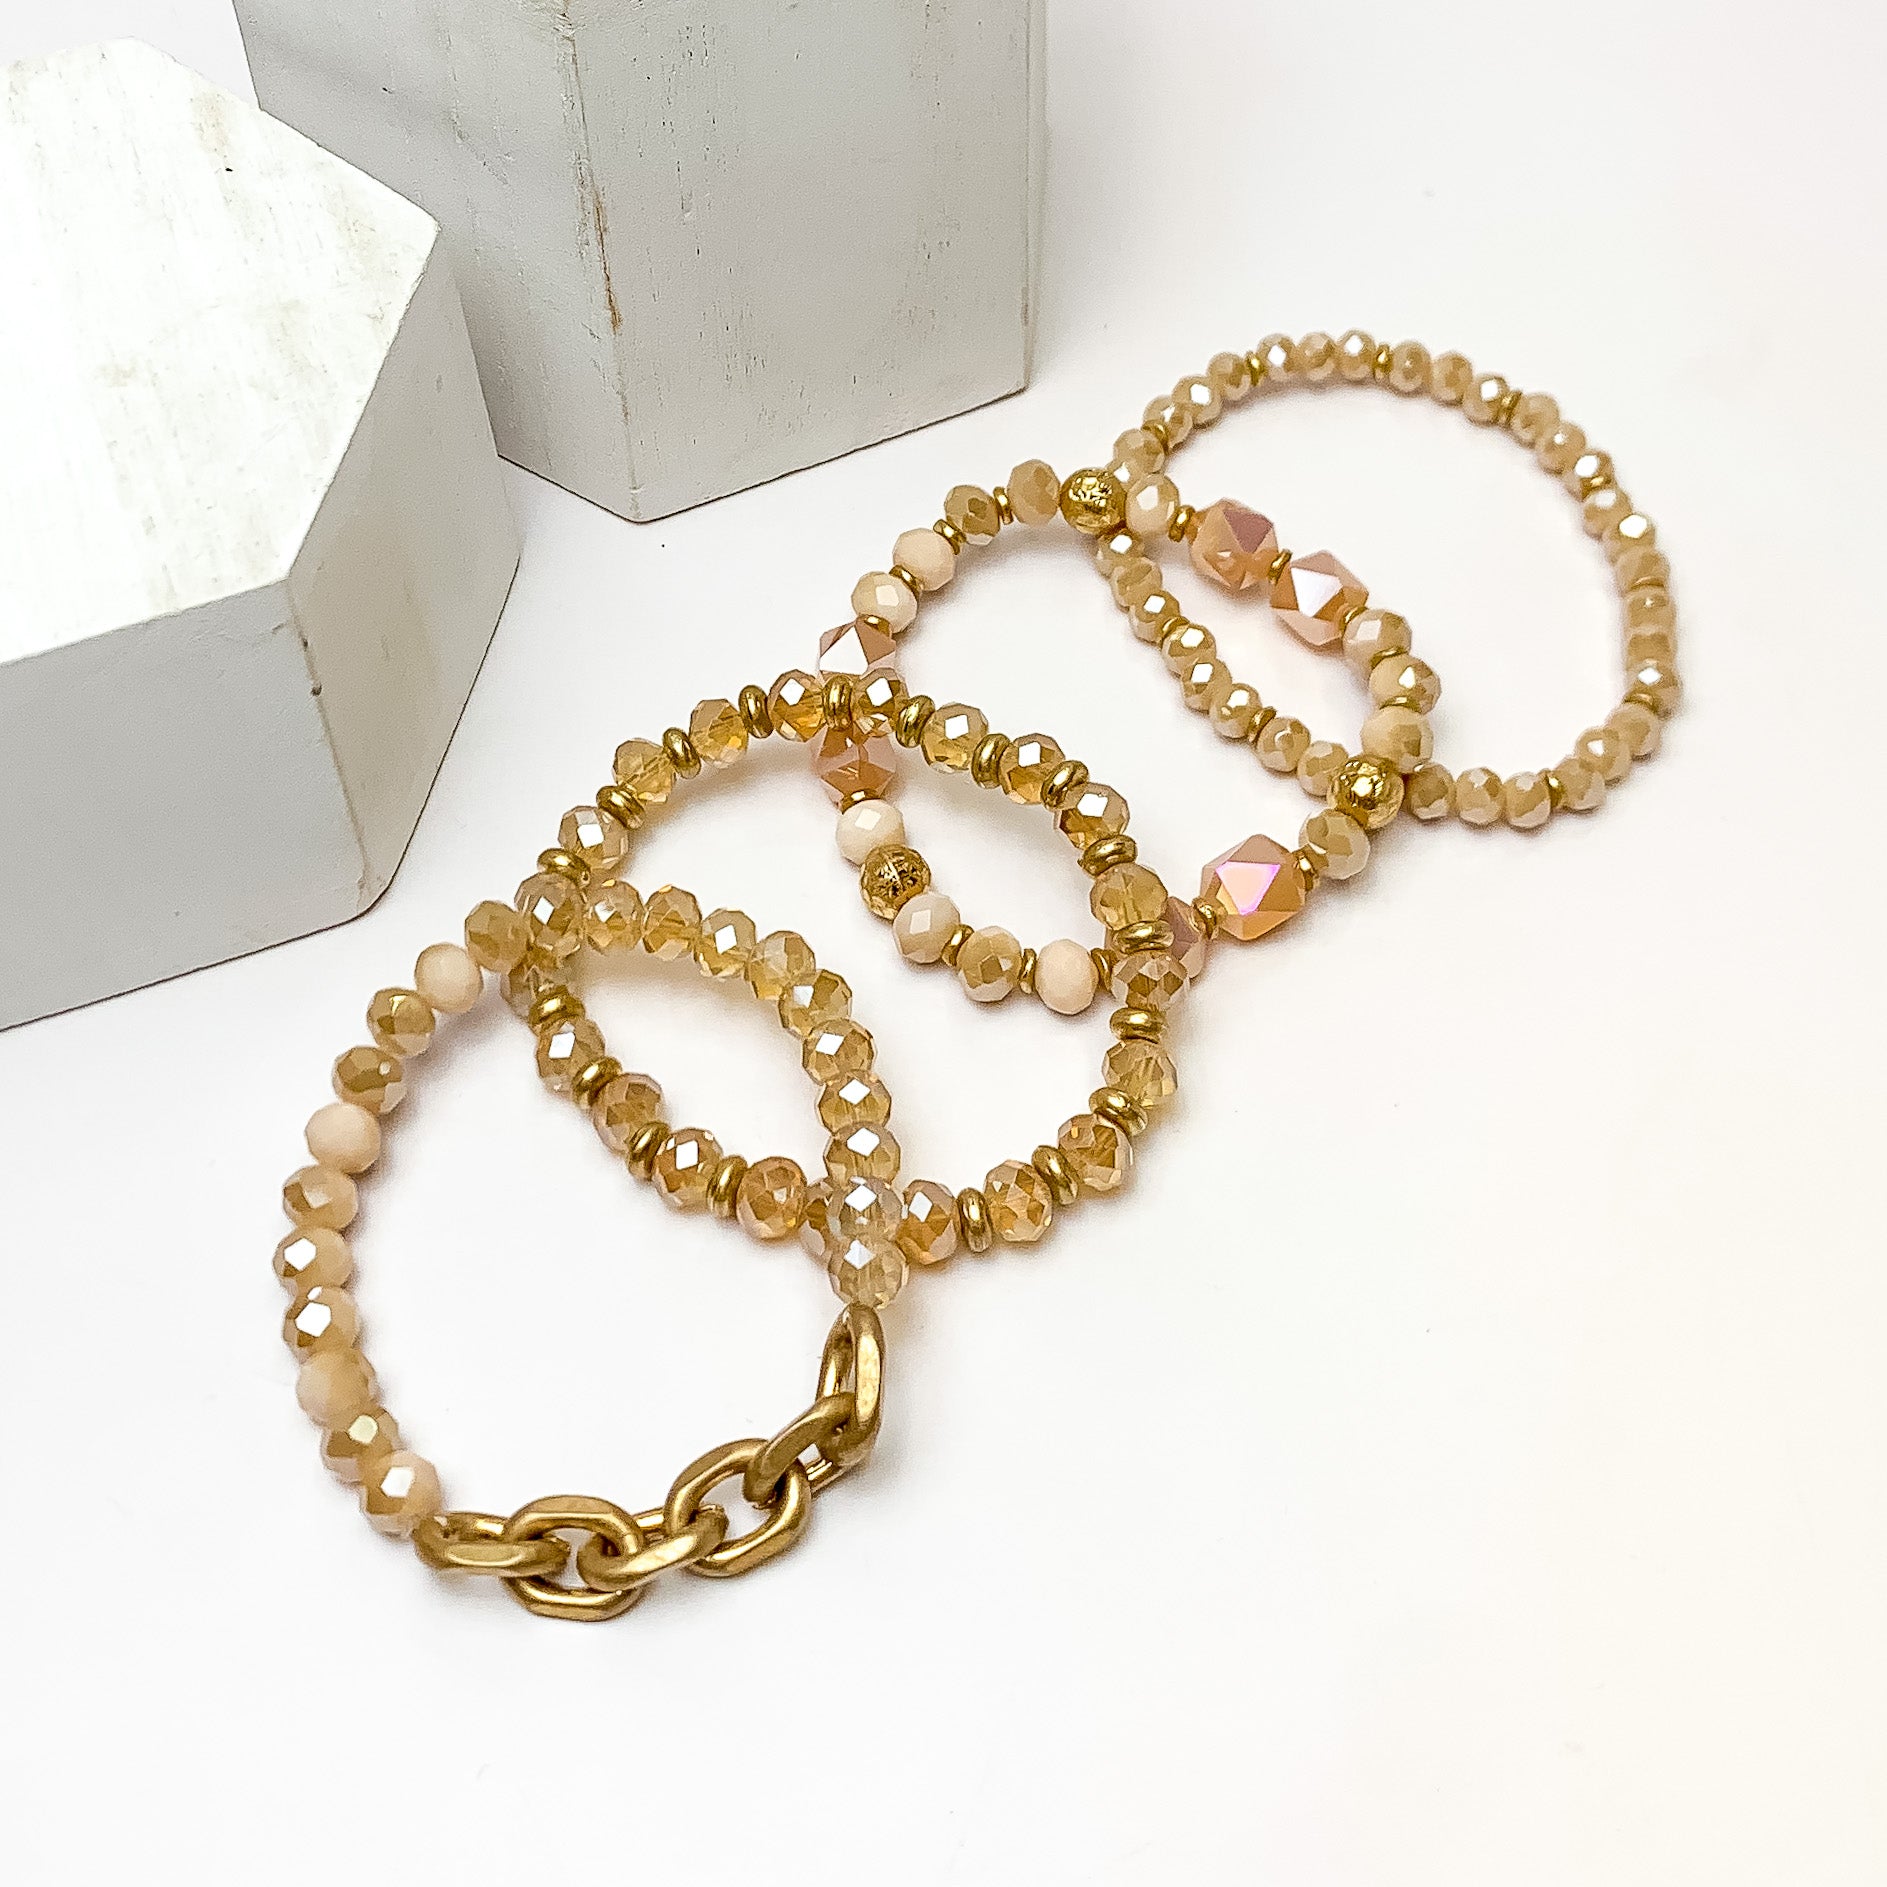 Set of Four | Upper East Gold Tone Beaded Bracelet Set in Blush Pink. Pictured on a white background with two white podium behind the earrings.